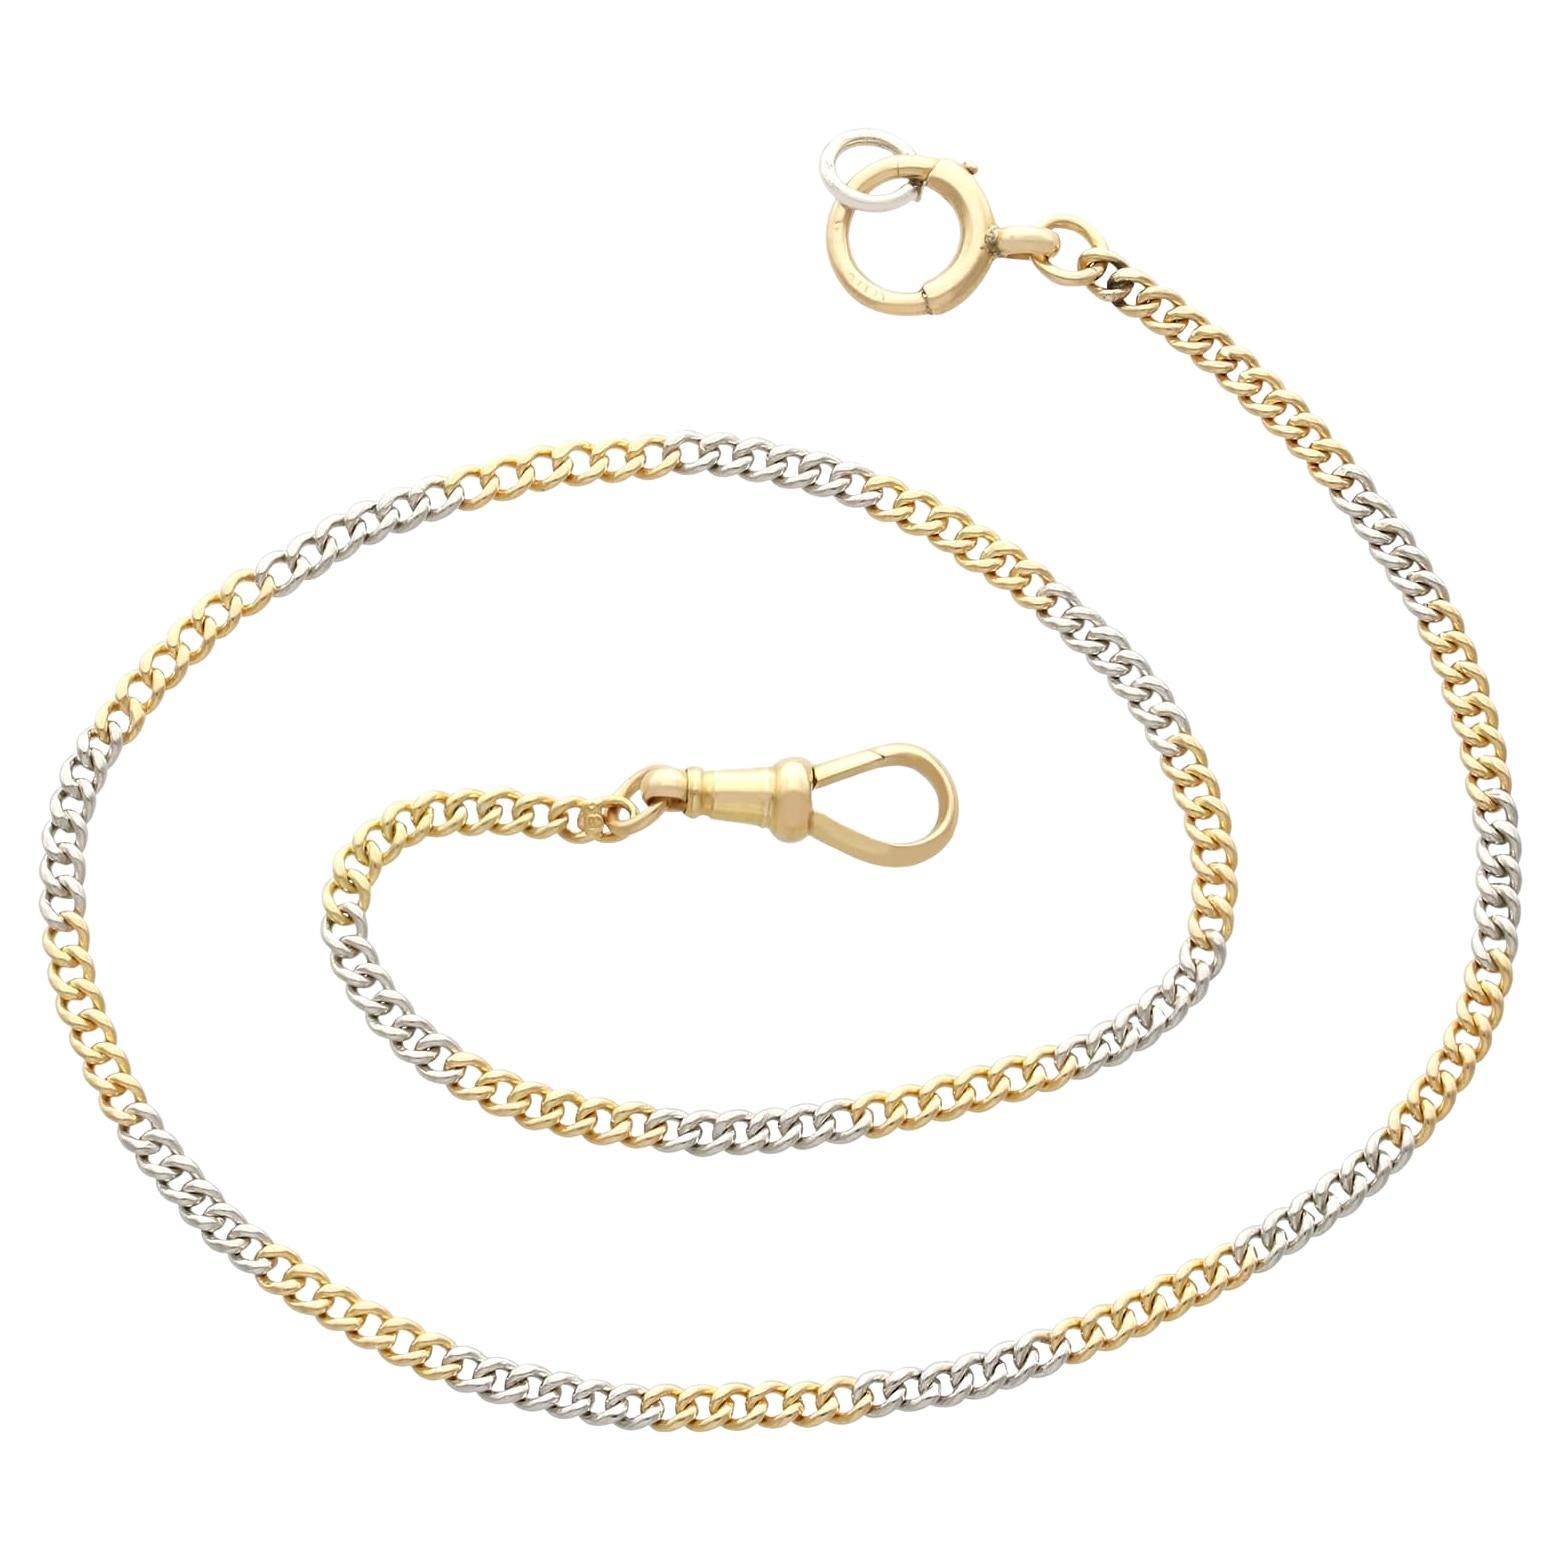 Antique 18k Yellow Gold and Platinum Ladies Fob Watch Chain Circa 1910